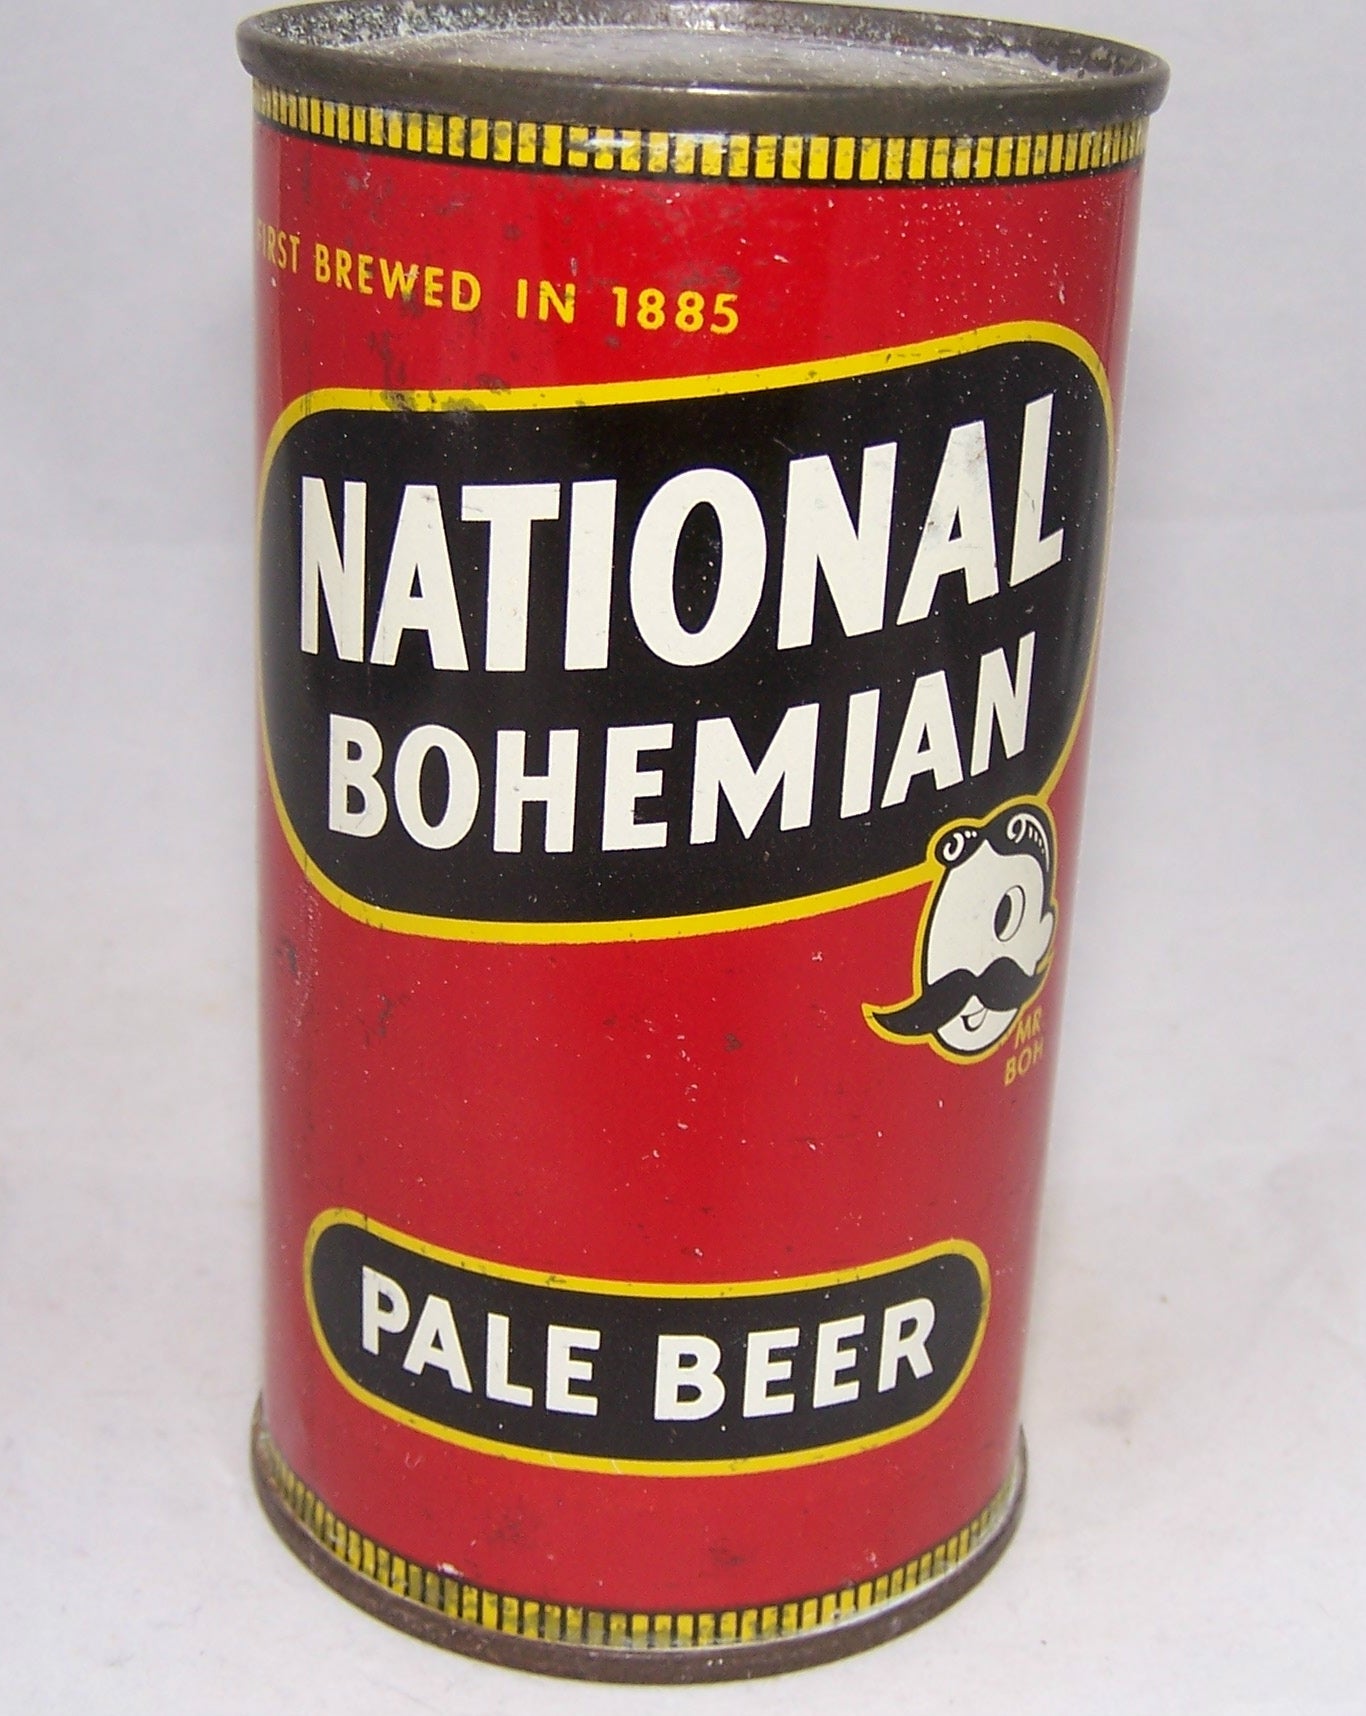 National Bohemian Pale Beer, USBC 102-05, Grade 1/1- Sold on 09/01/17